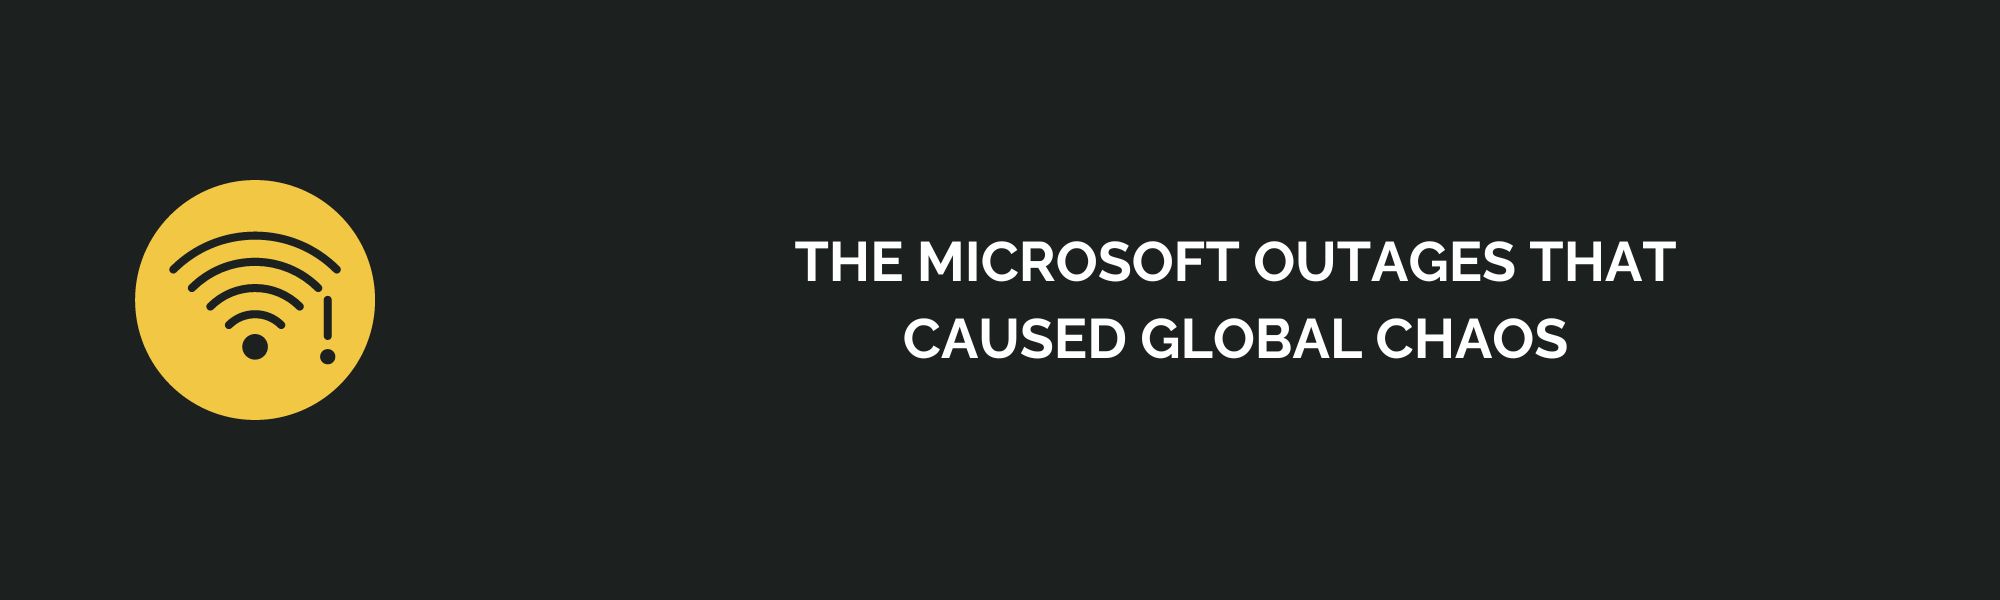 The Microsoft Outages That Caused Global Chaos